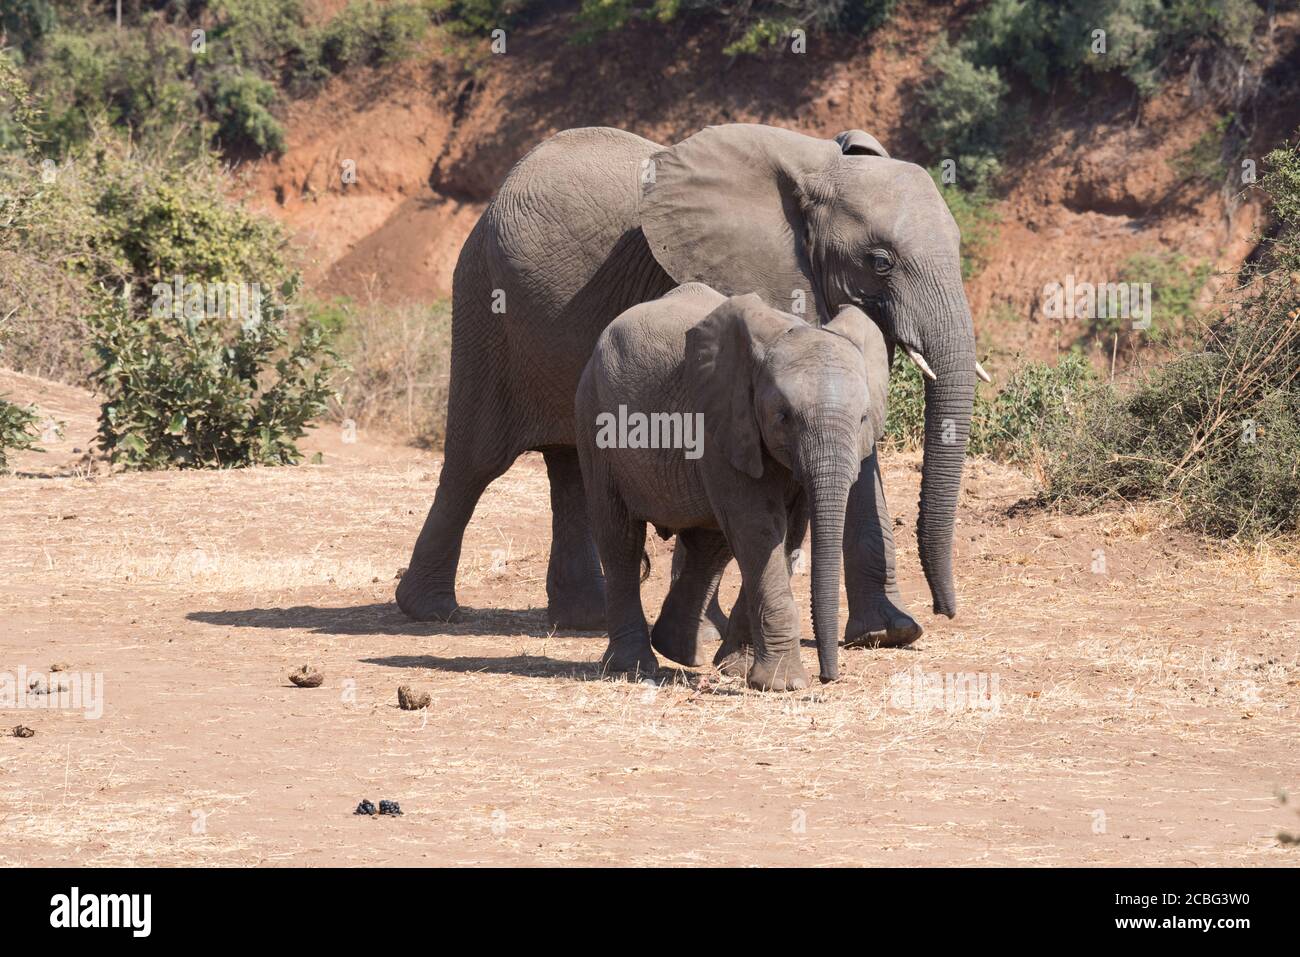 Two elephants young in age walking in overgrazed area next to the dry river bed Stock Photo